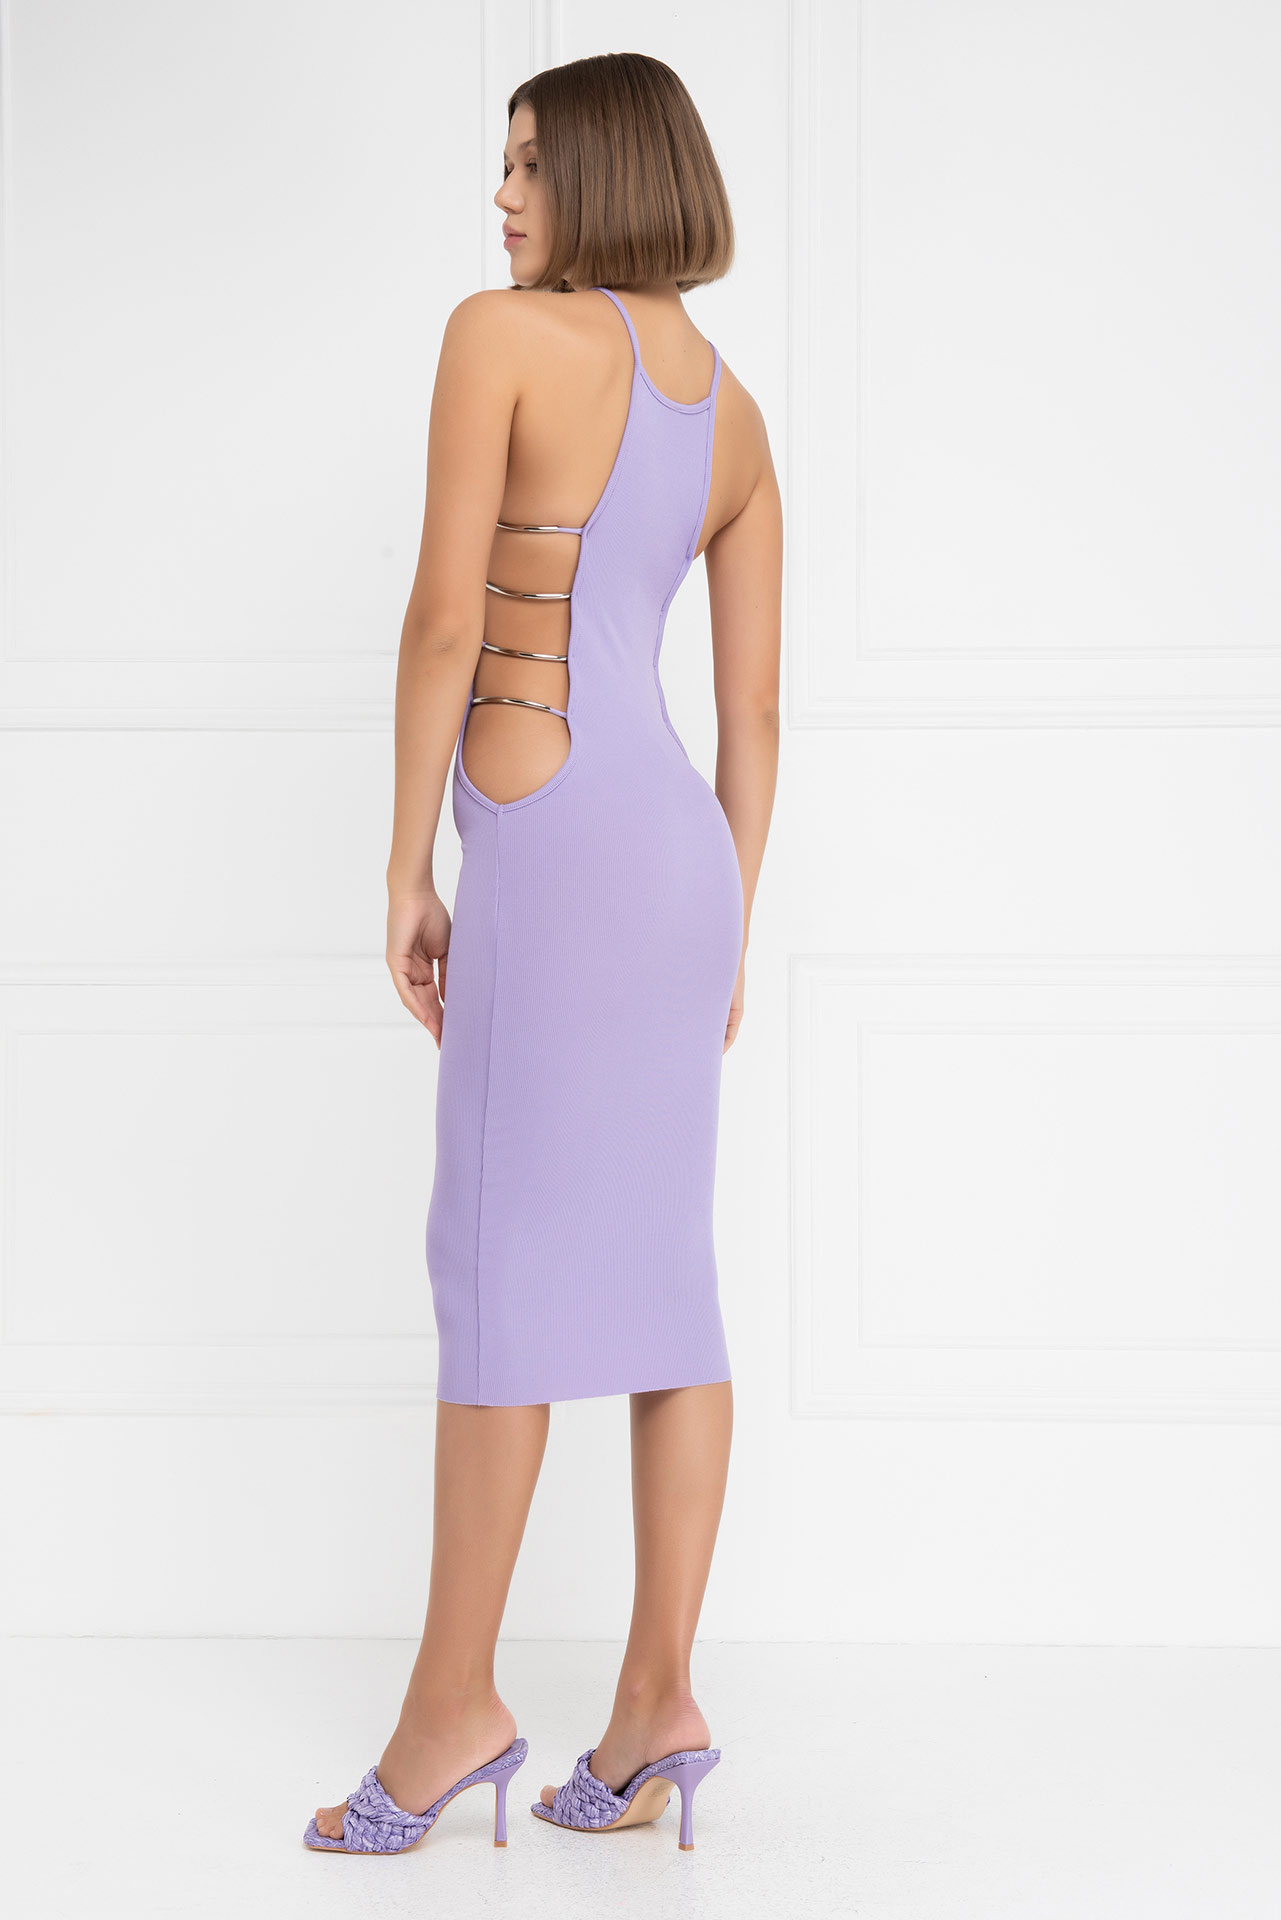 Wholesale Ladder Cut Out New Lilac Cami Dress